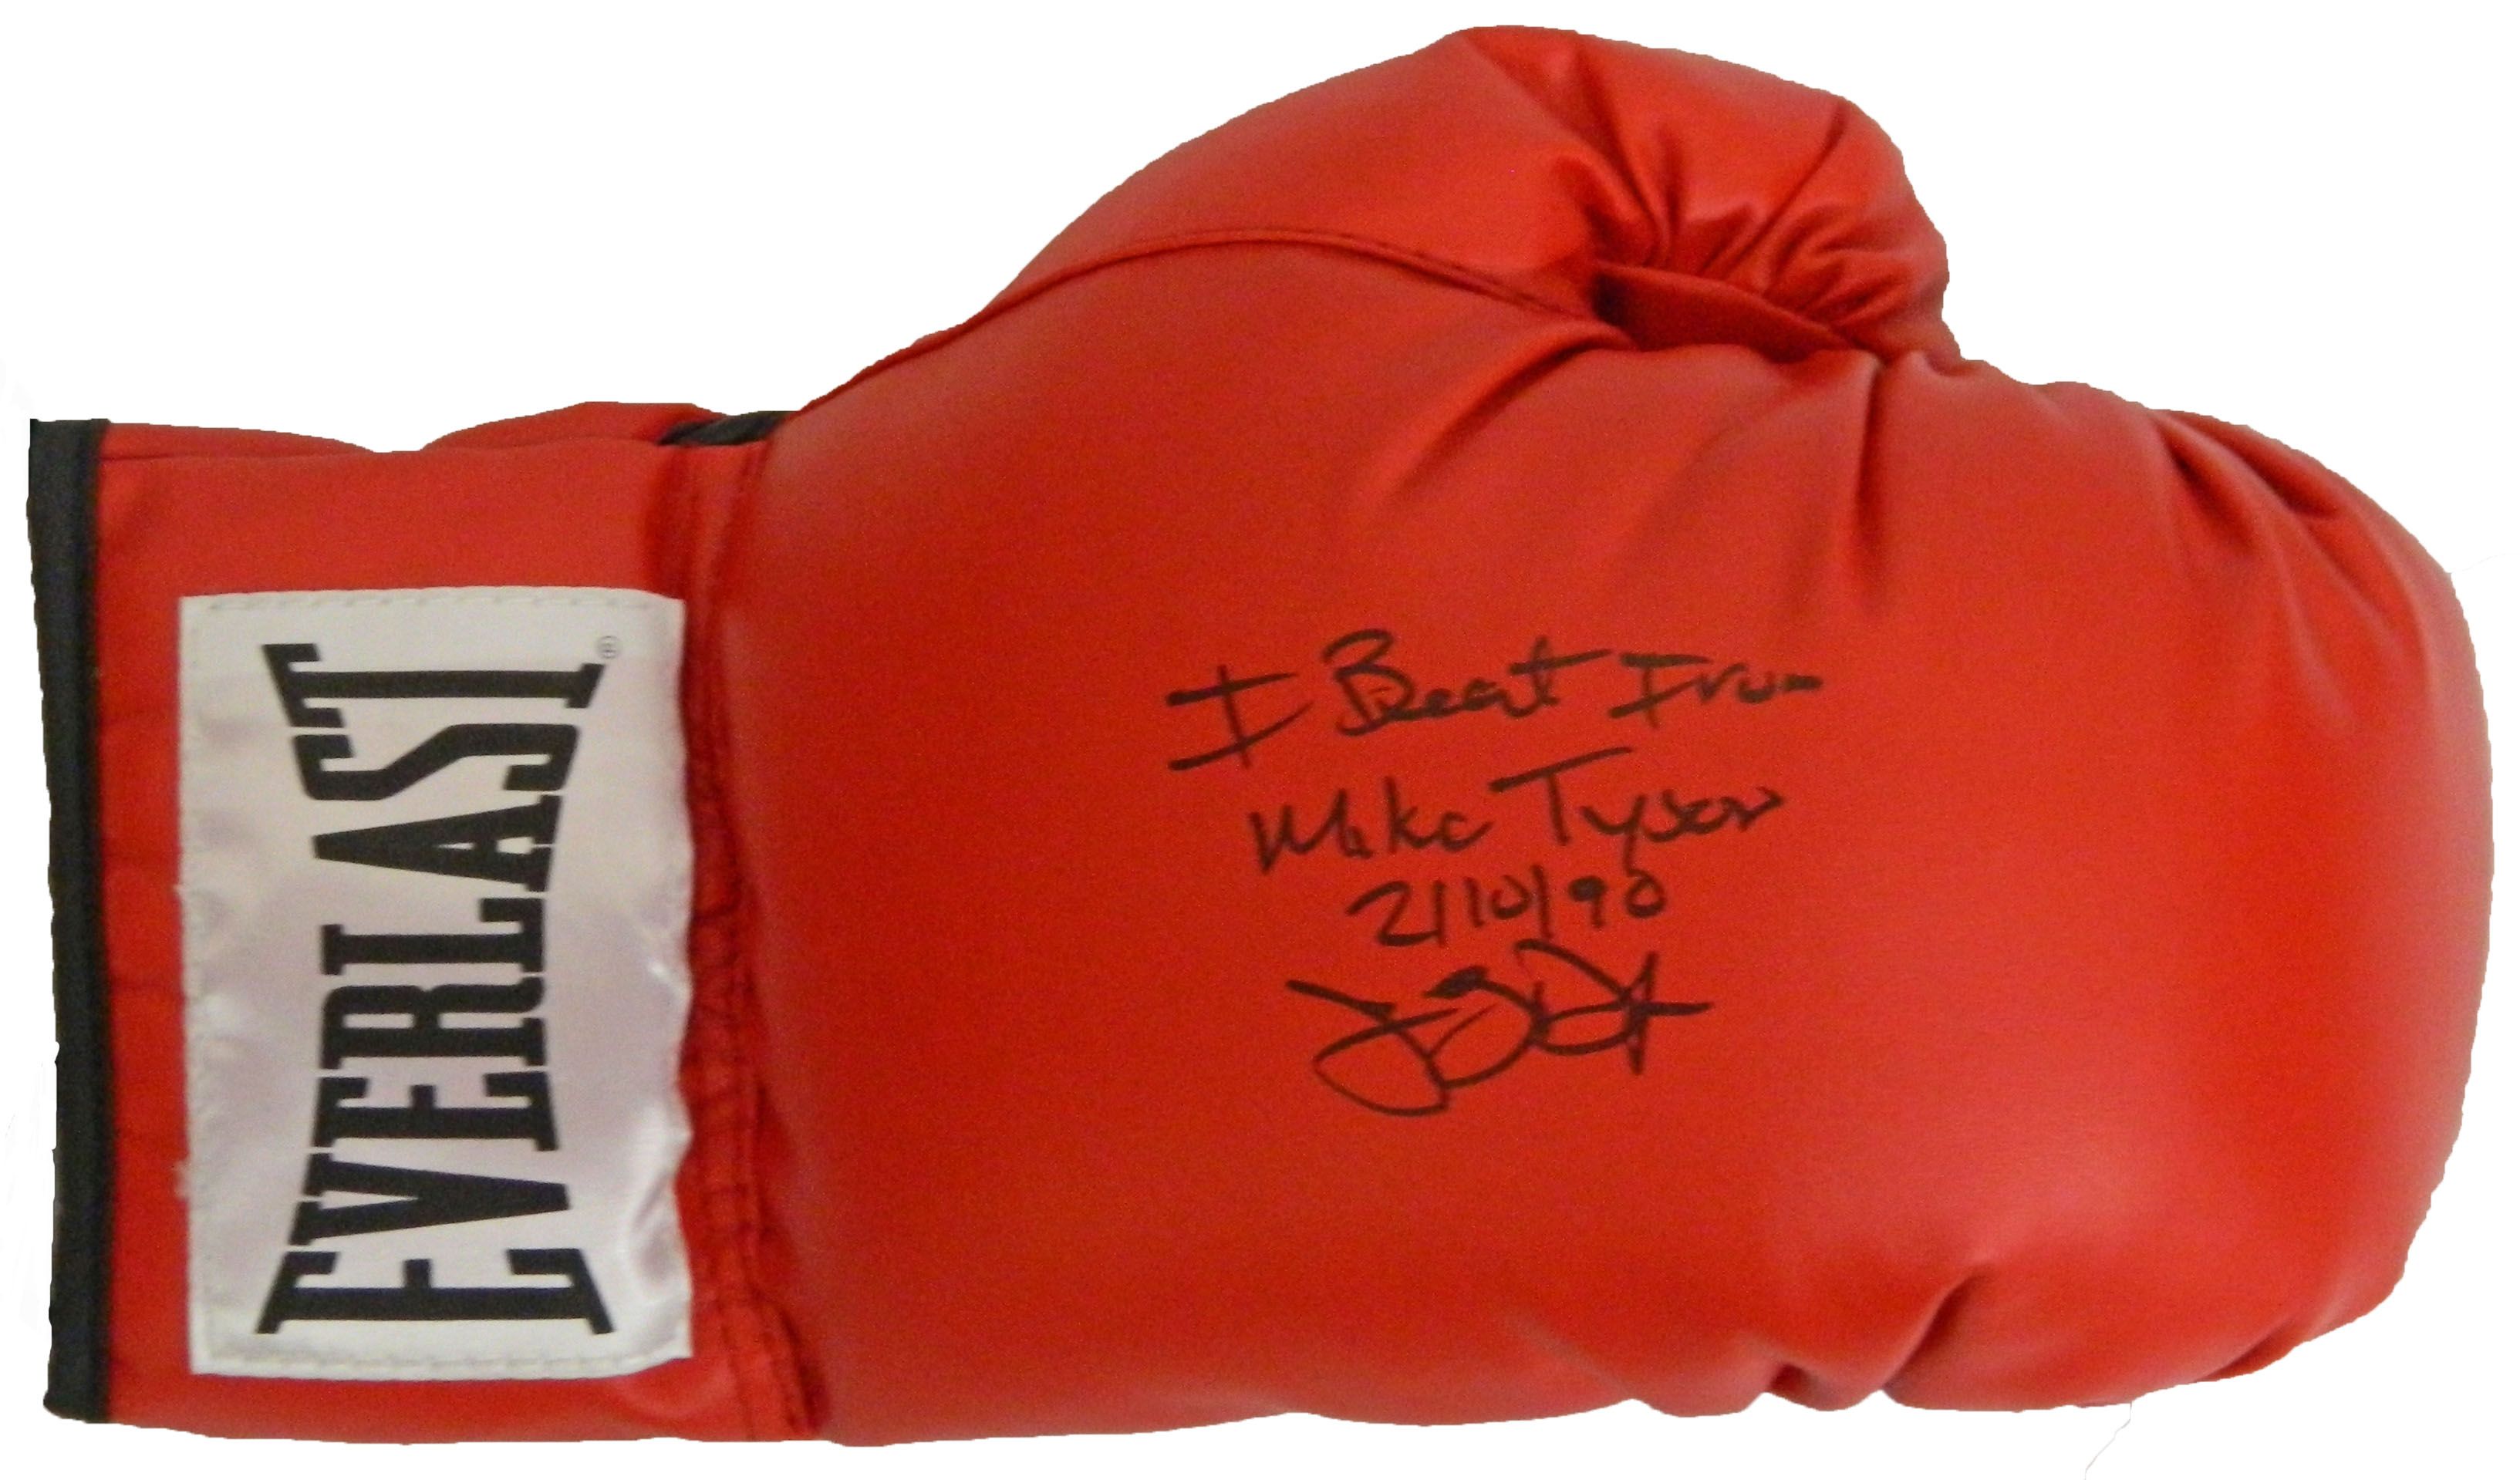 James Buster Douglas Signed Everlast Boxing Glove w I Beat Iron Mike